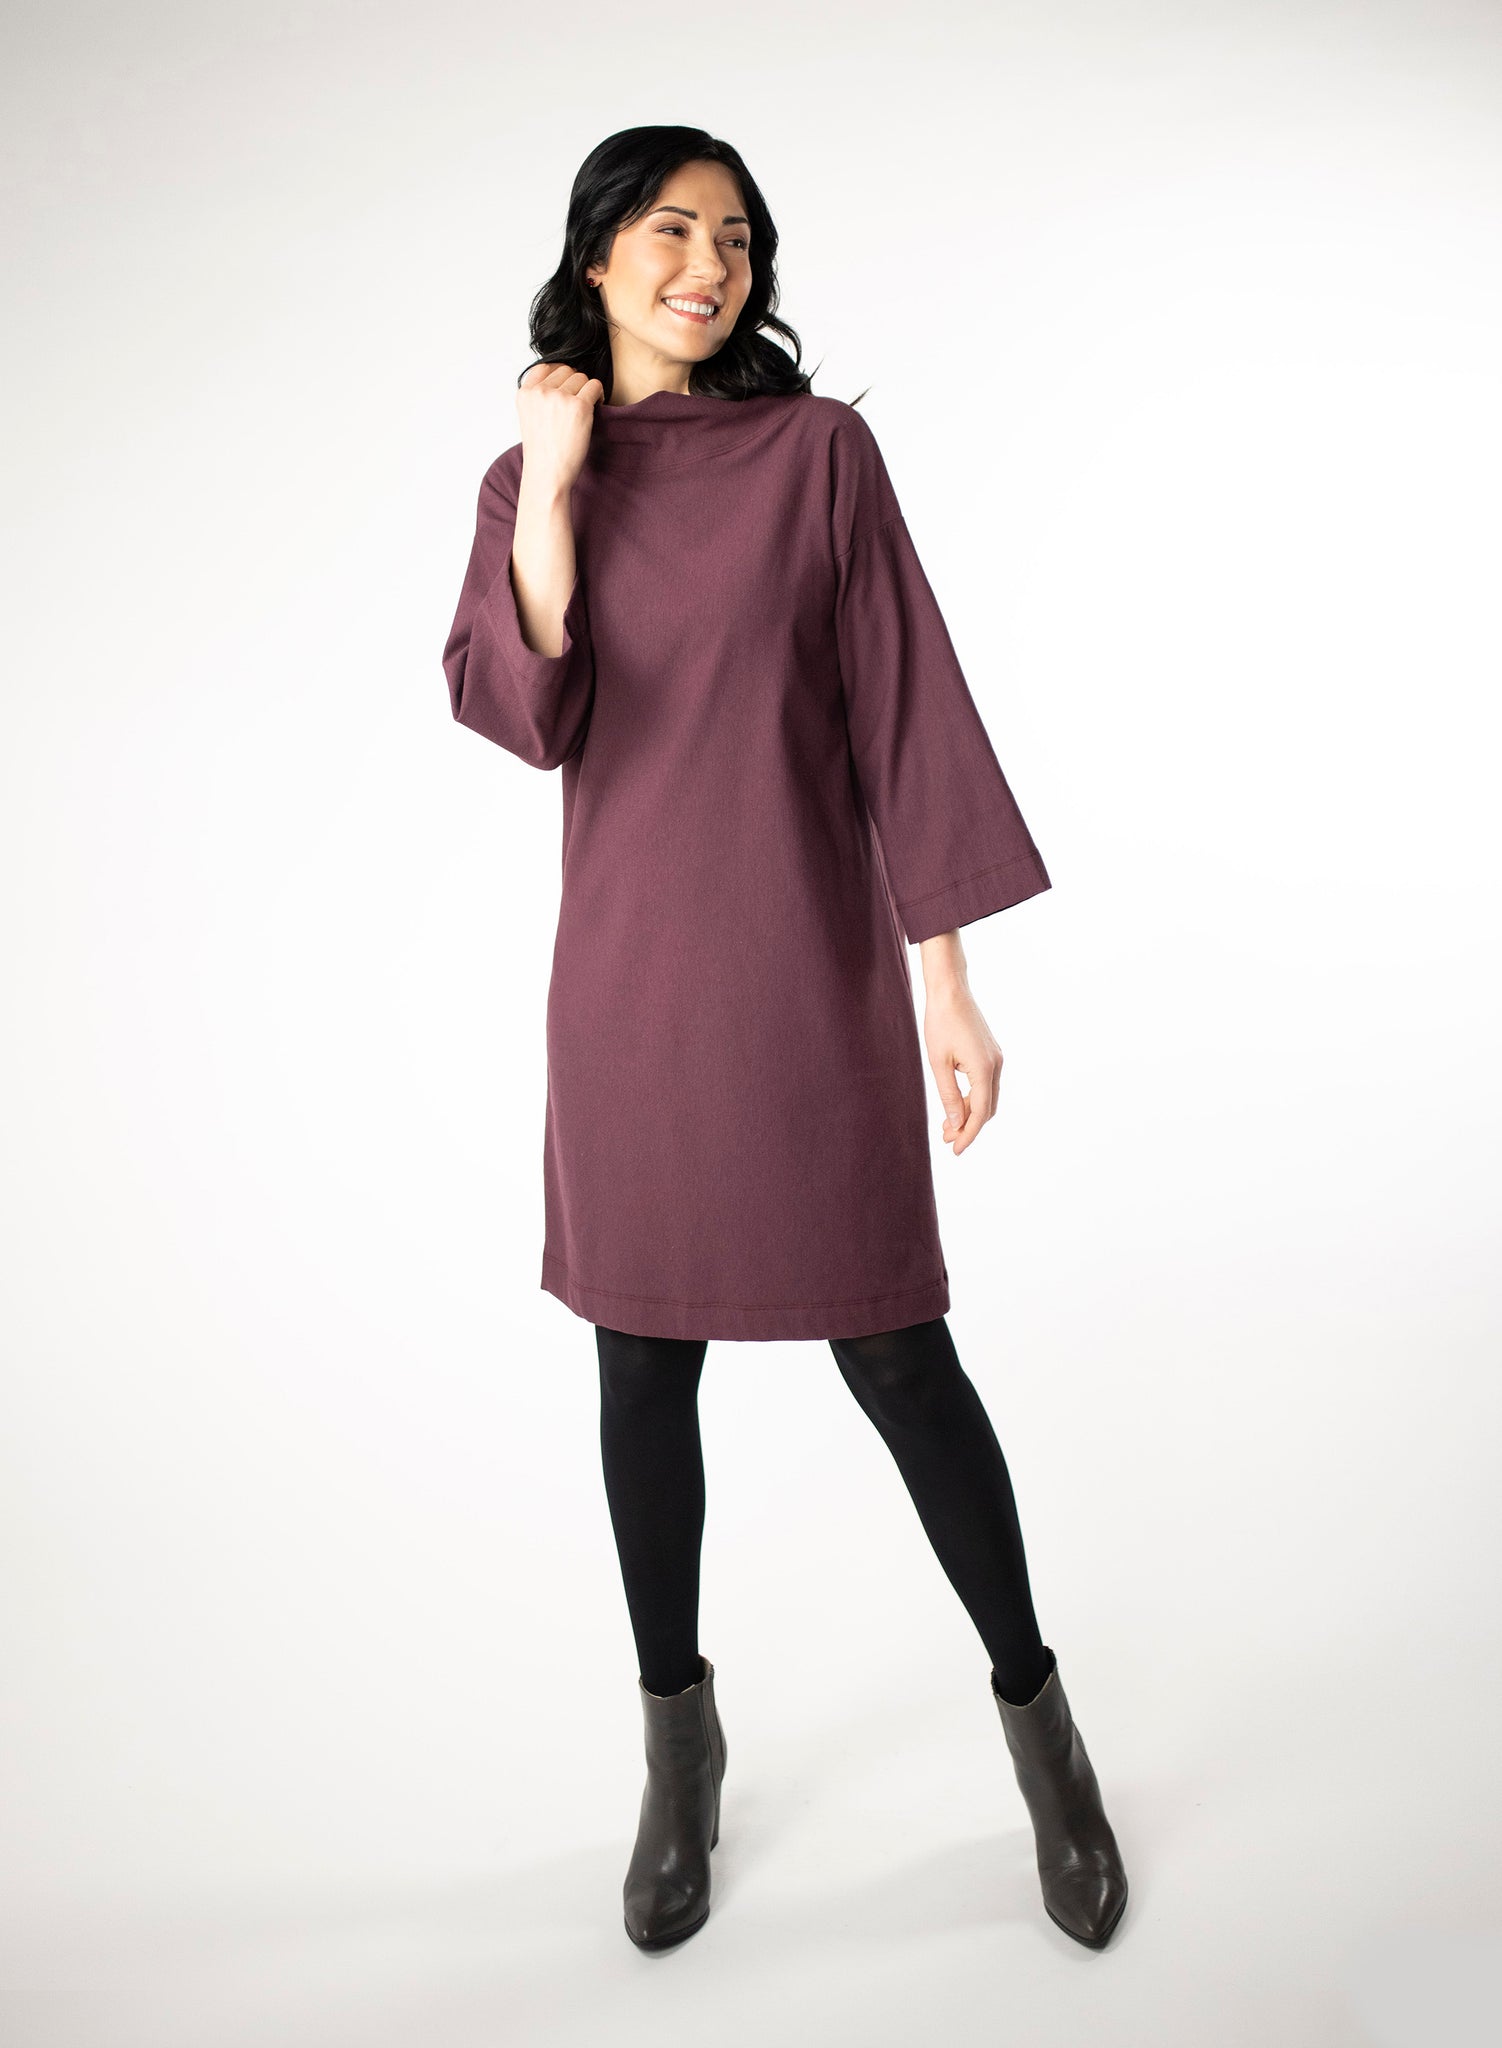 Sterling Sweater Dress Made in Canada by Duffield Design Lux Eco